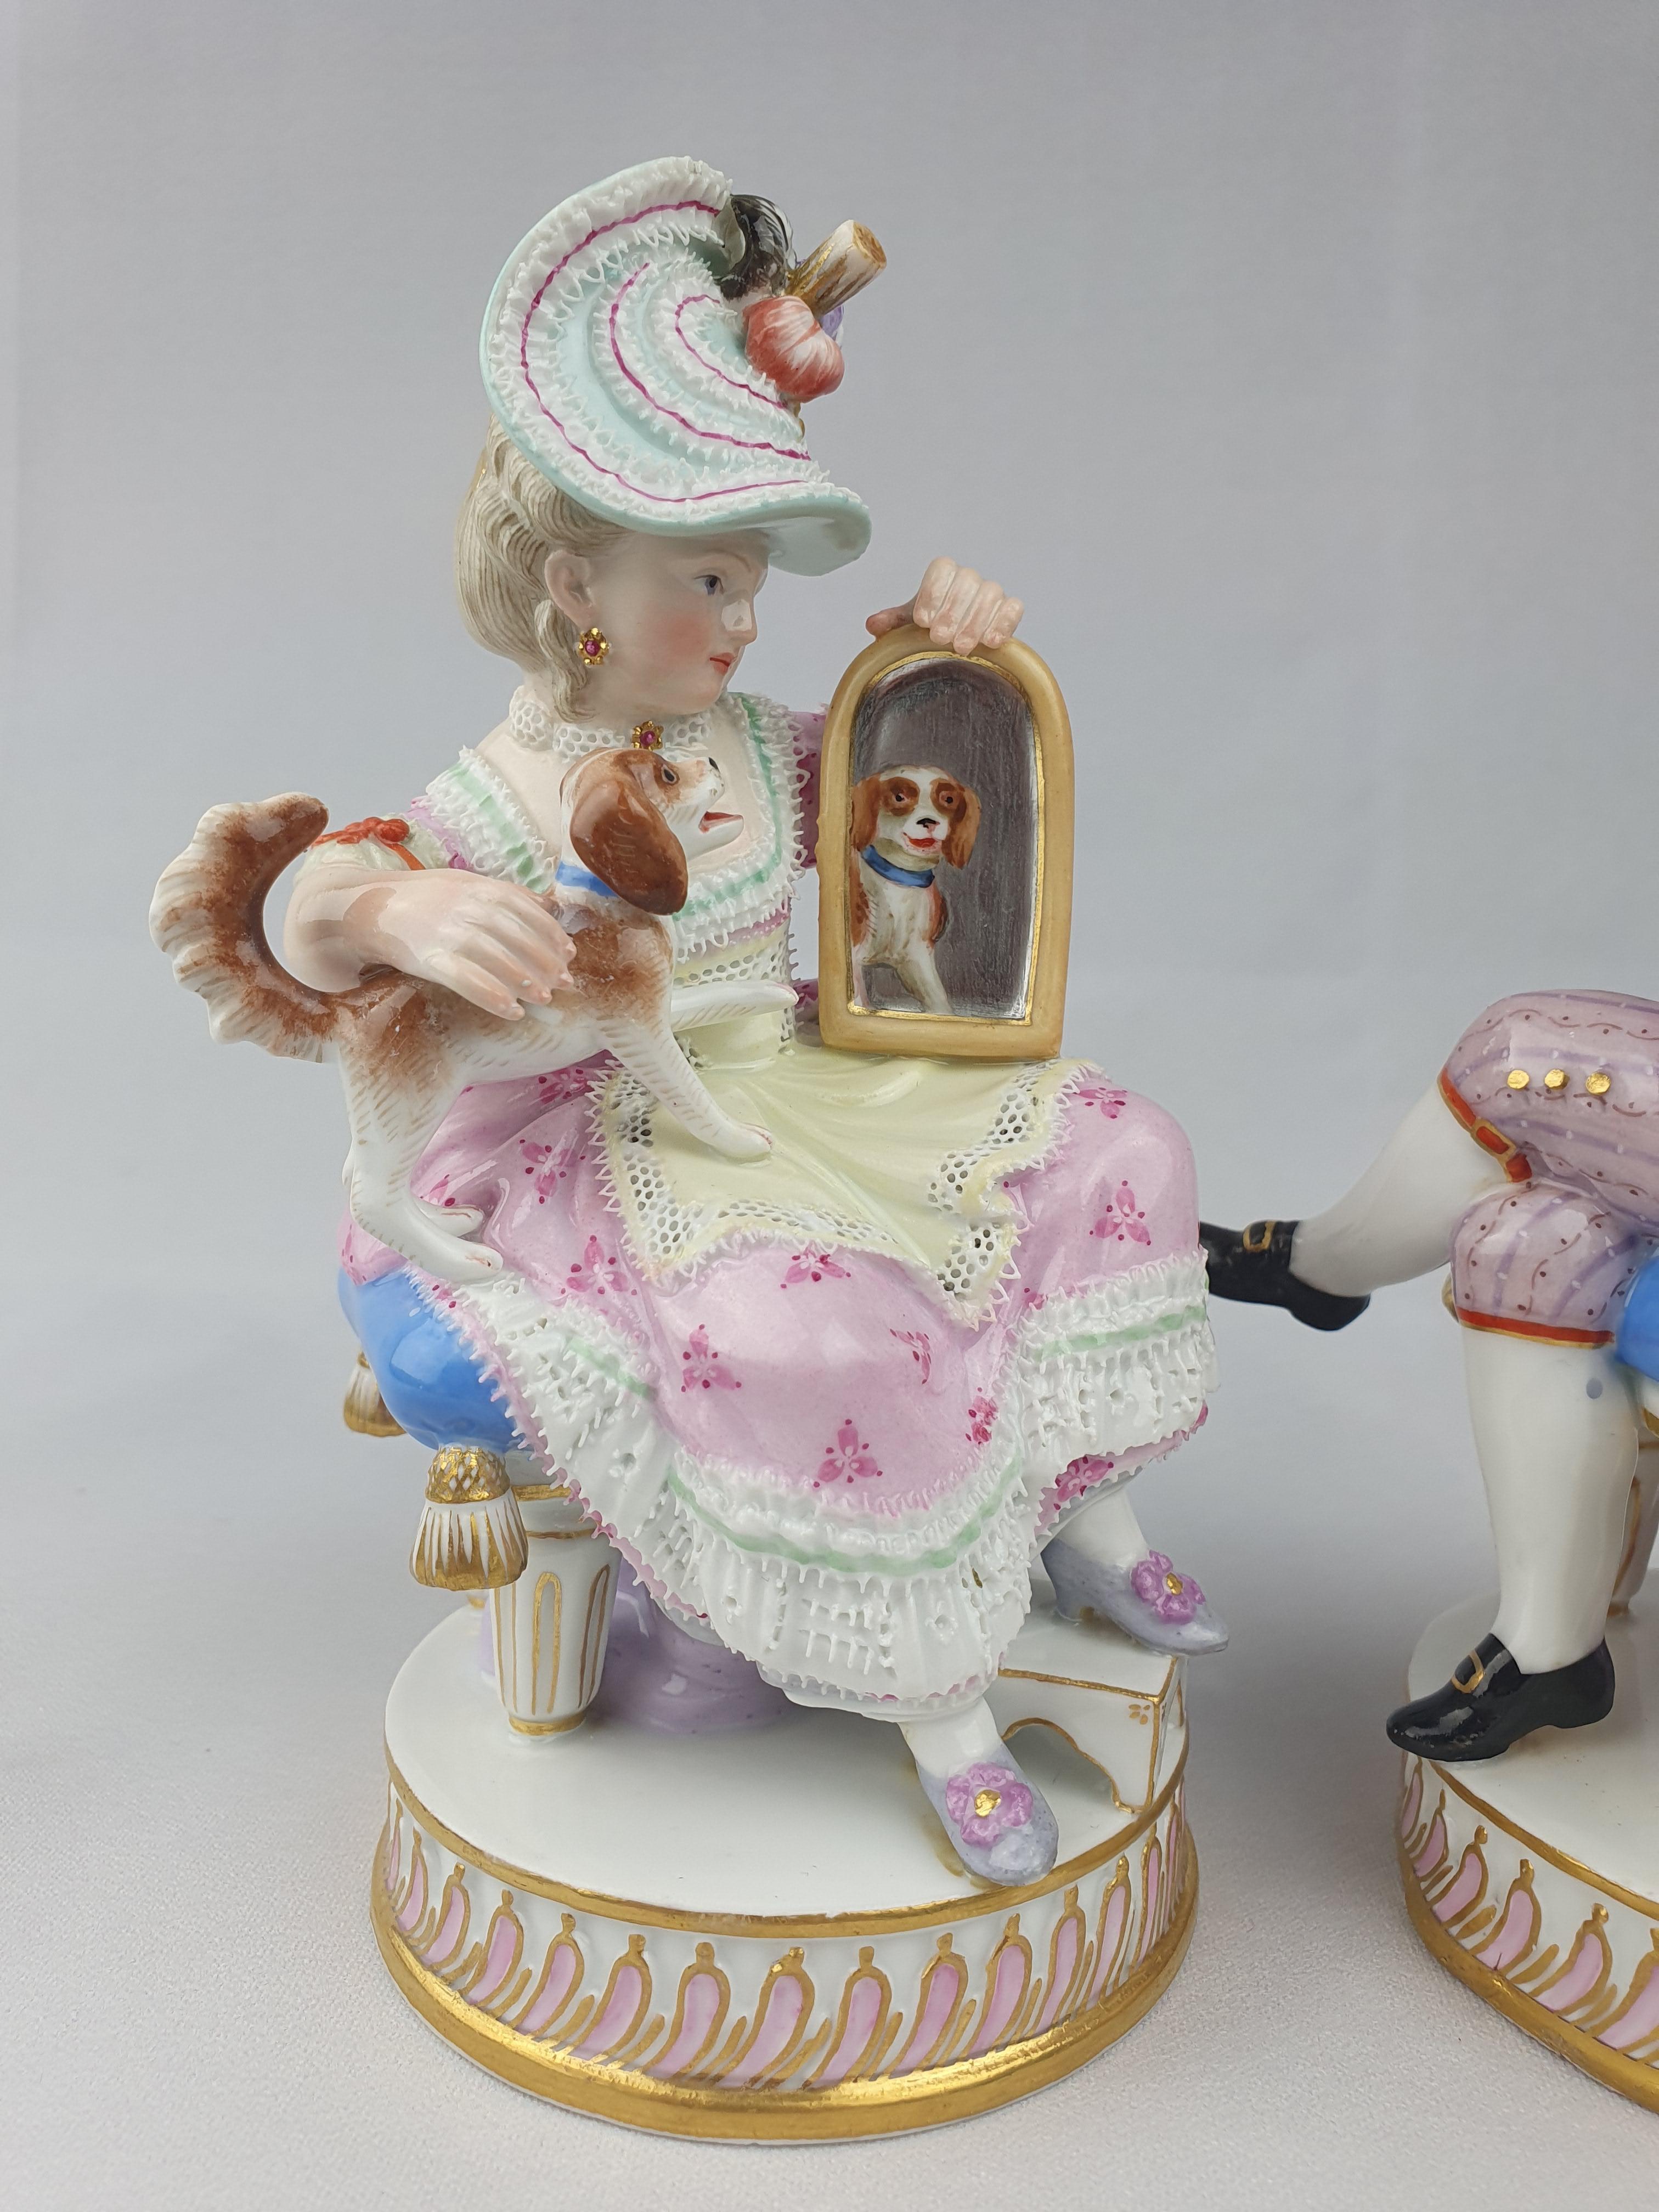 Modelled as a huntsman seated on a stool holding a gun, with a dog at his feet, on a circular plinth base, his female companion similarly modelled seated on a stool holding a hound and a mirror, on similar base. First modelled by Acier c1776.

Circa